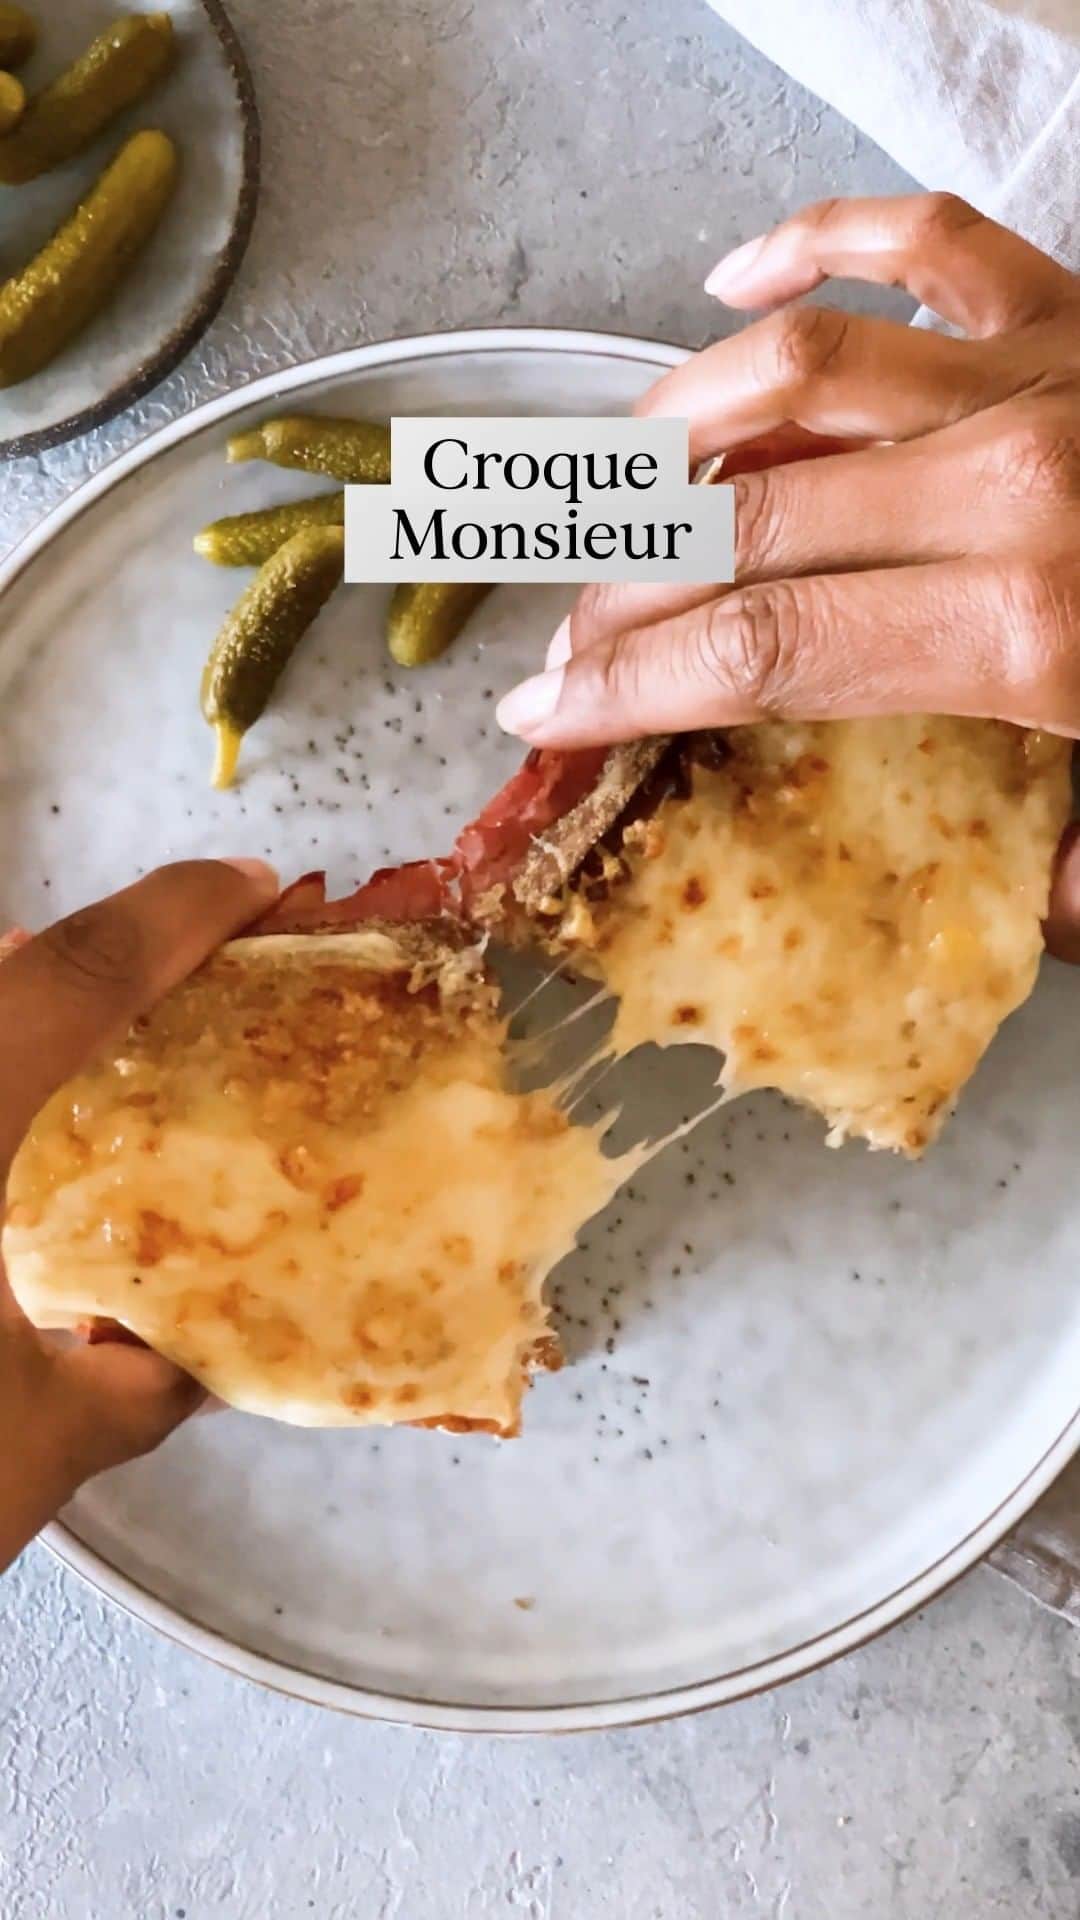 Tesco Food Officialのインスタグラム：「Only the finest Swiss cow's milk goes into making our Tesco Finest Gruyere. Take your ham and cheese toastie up a notch and try it in this croque monsieur recipe for a melted masterpiece. Head to the link in bio for the recipe.」